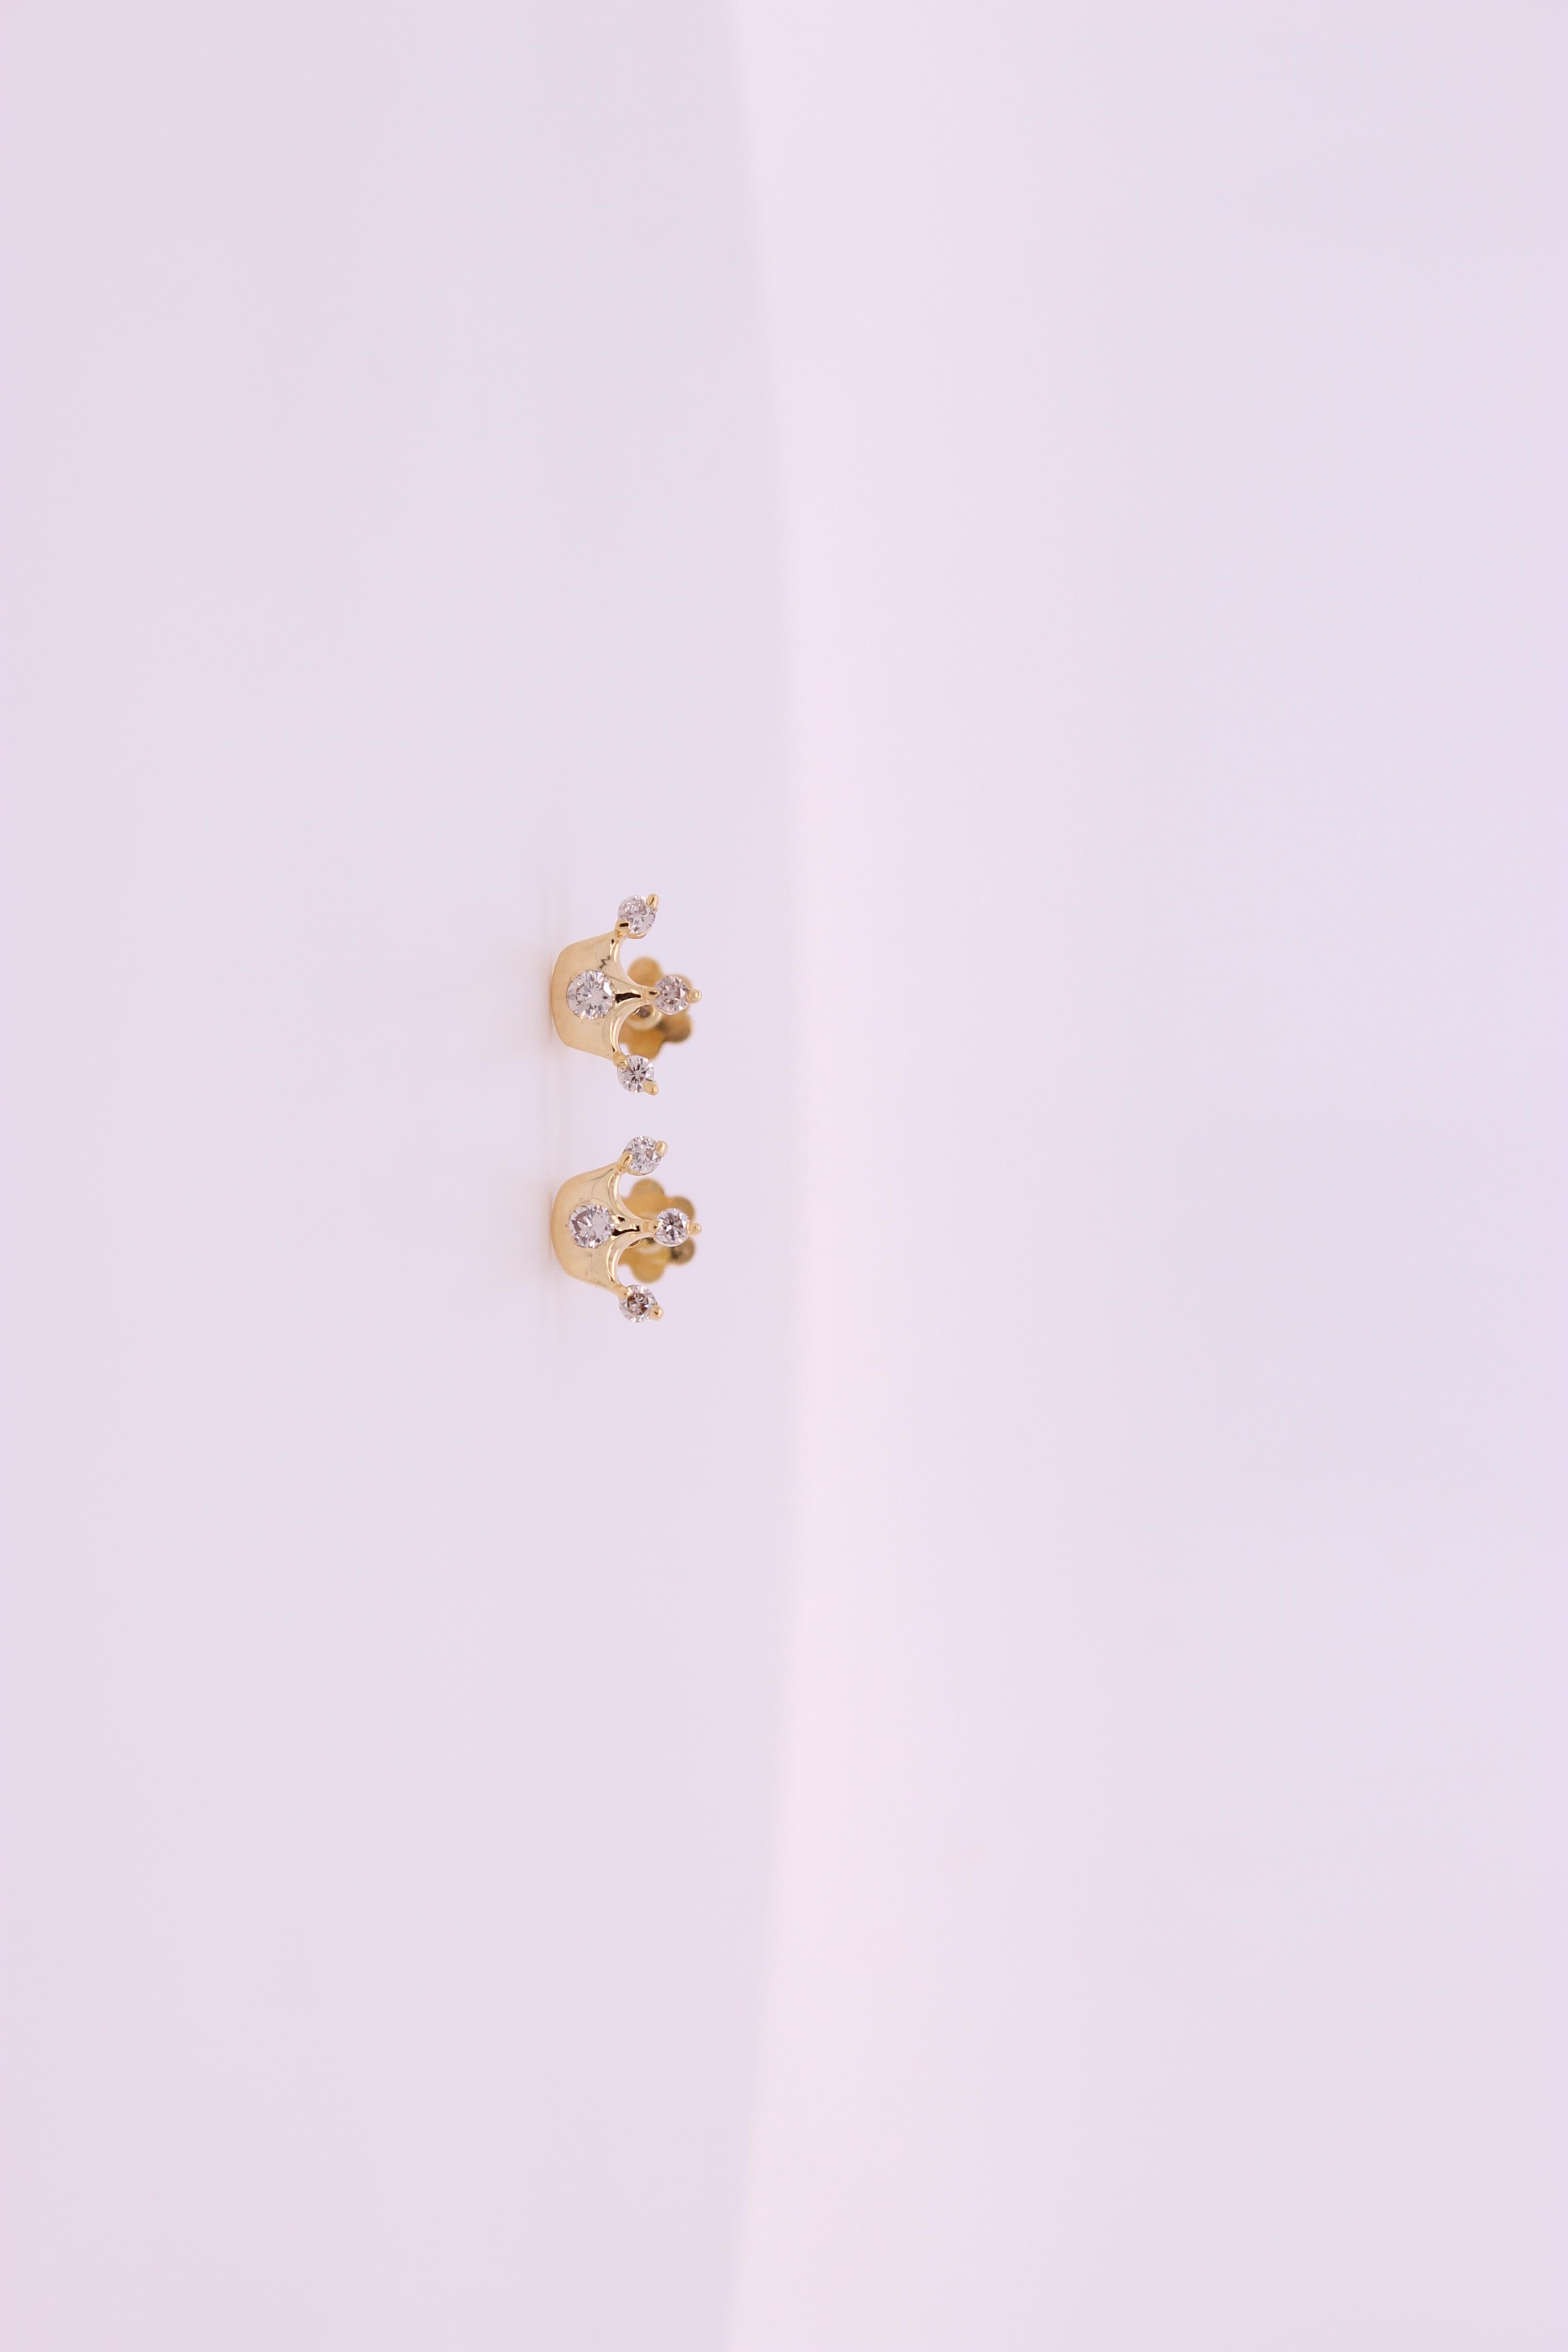 Regal Crown Diamond Earrings for Girls (Kids/Toddlers) in exquisite 18K Solid Gold. These enchanting earrings are adorned with delicate diamonds, adding a touch of royal elegance to your little one's look, all while ensuring safety and comfort with